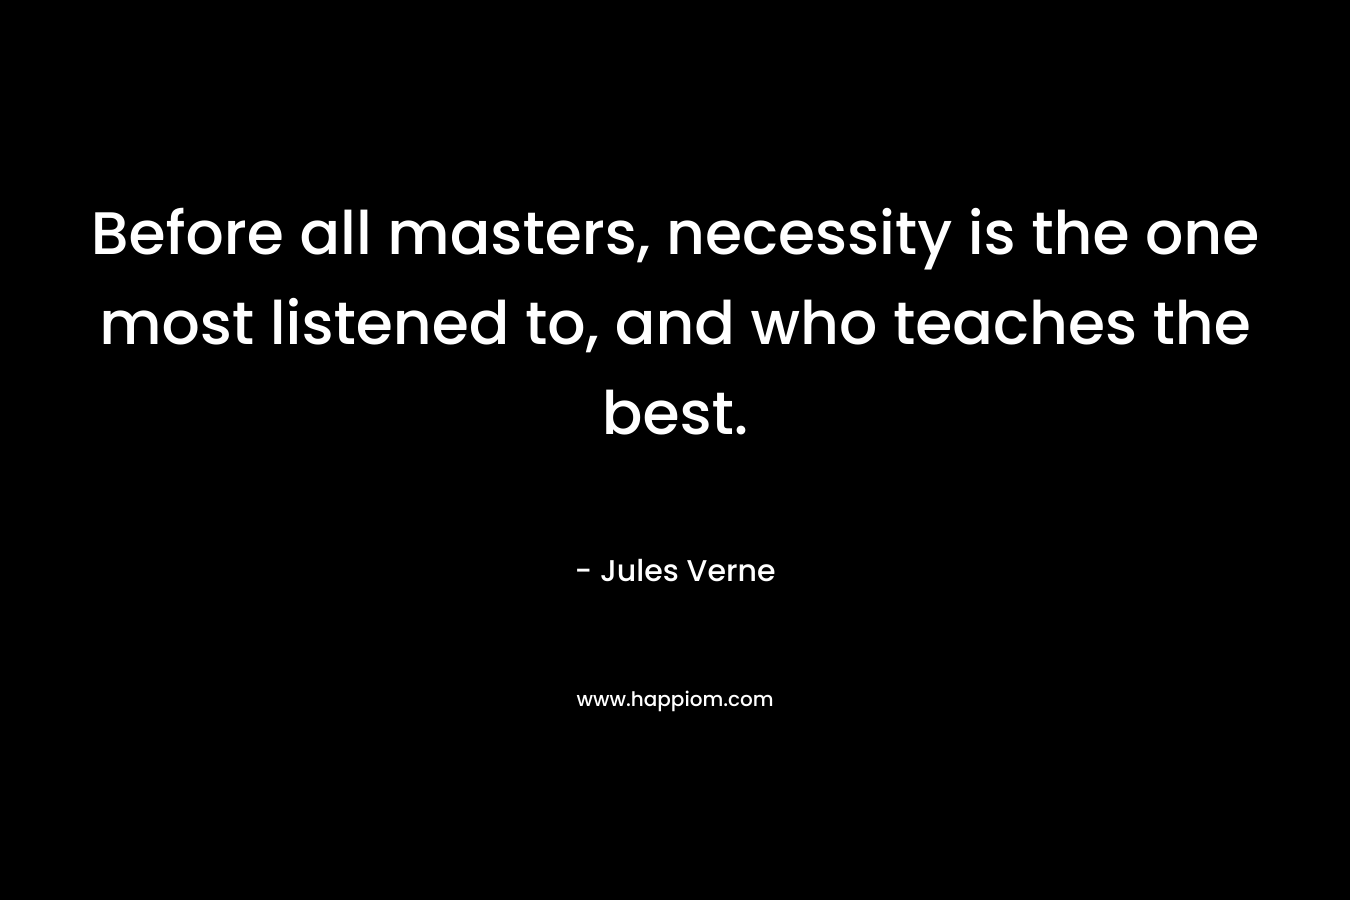 Before all masters, necessity is the one most listened to, and who teaches the best. – Jules Verne